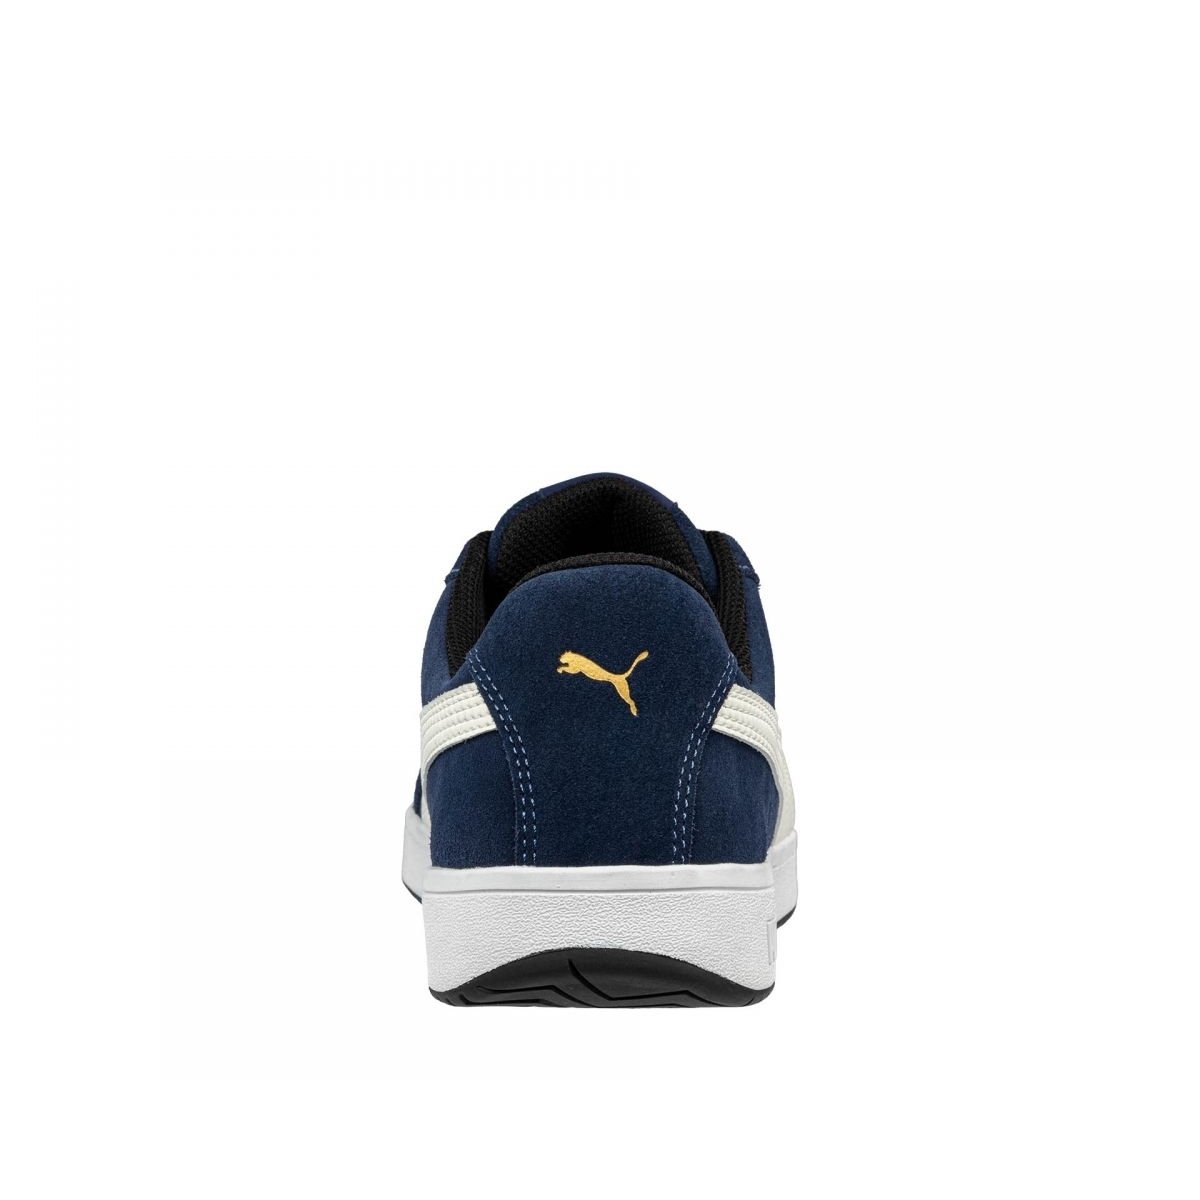 PUMA Safety Men's Iconic Low Composite Toe EH Work Shoes Navy Suede - 640025 ONE SIZE Navy - Navy, 8.5